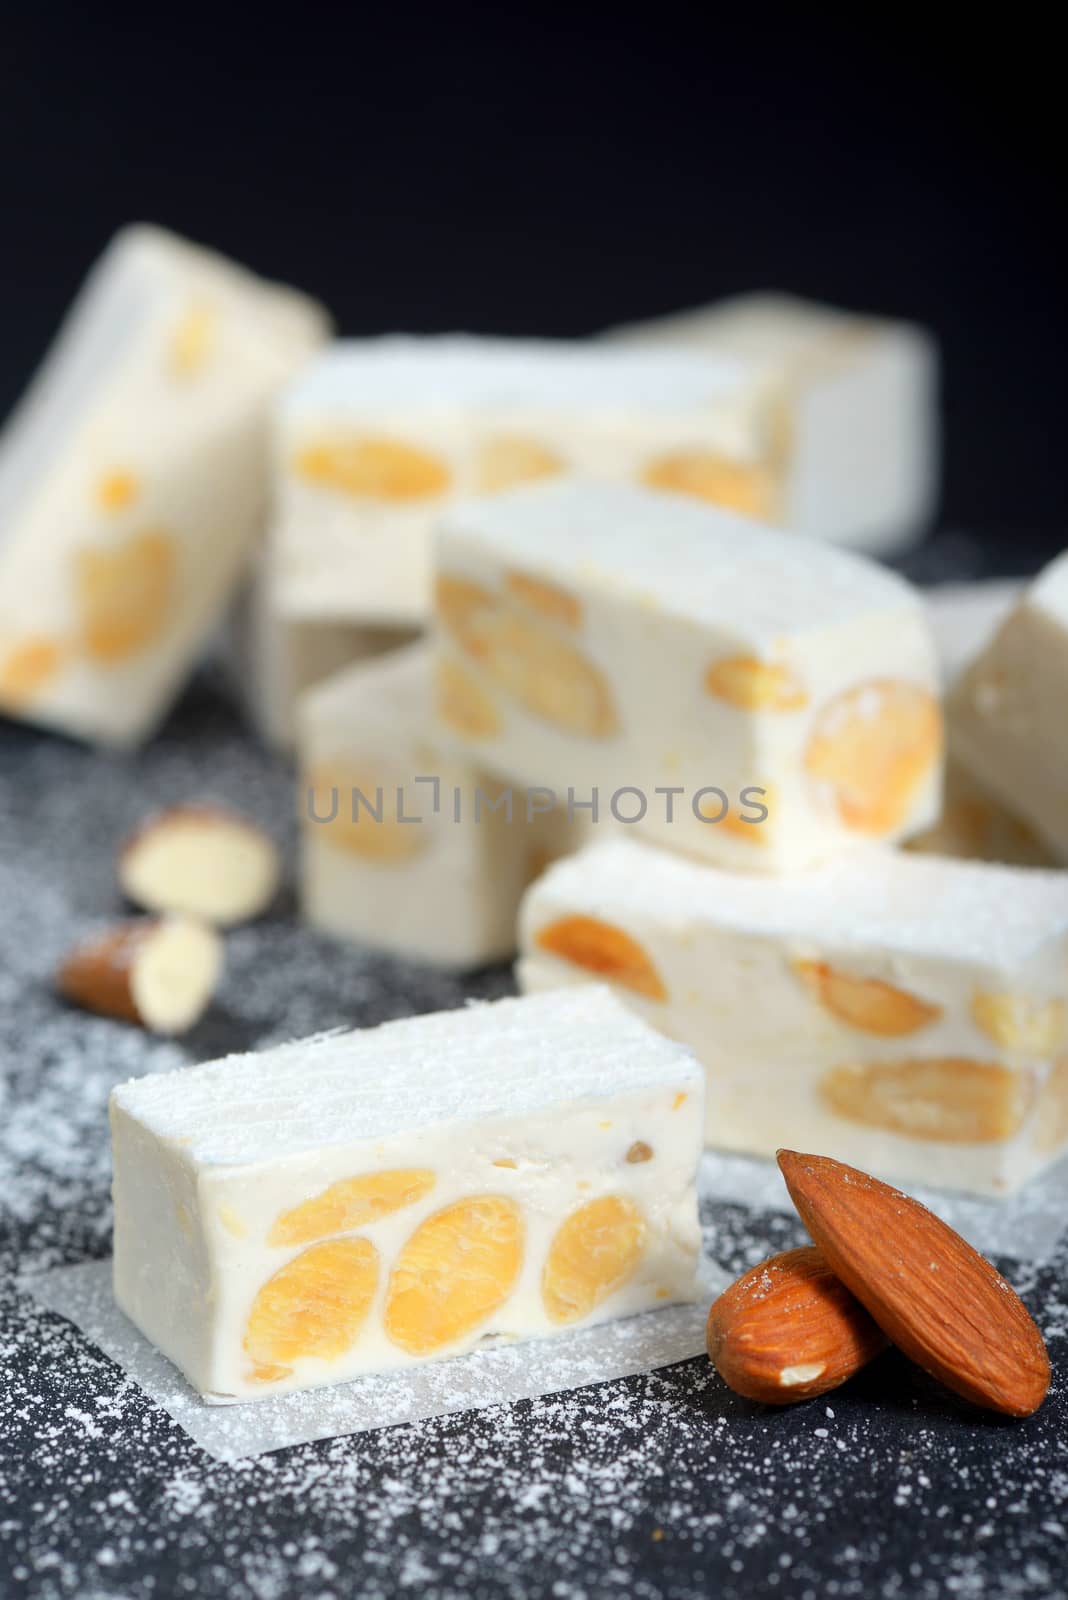 White nougat with almonds by mady70